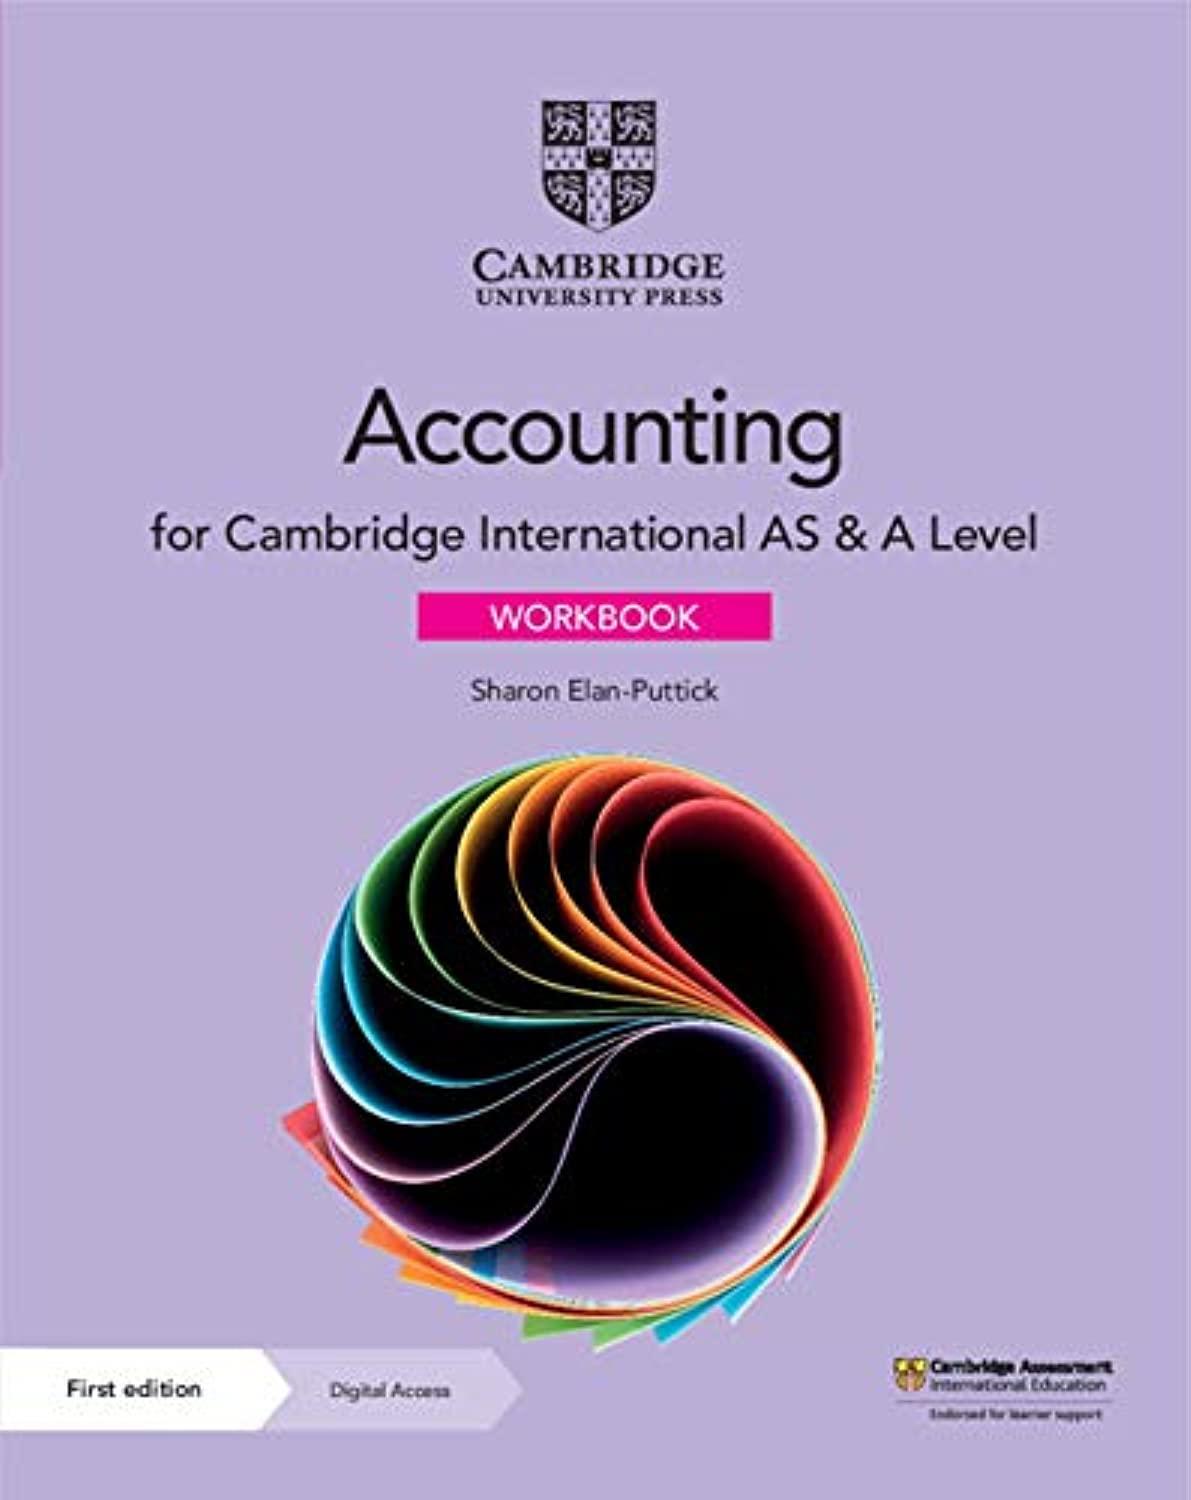 cambridge international as and a level accounting workbook 1st edition sharon elan-puttick 0702137723,